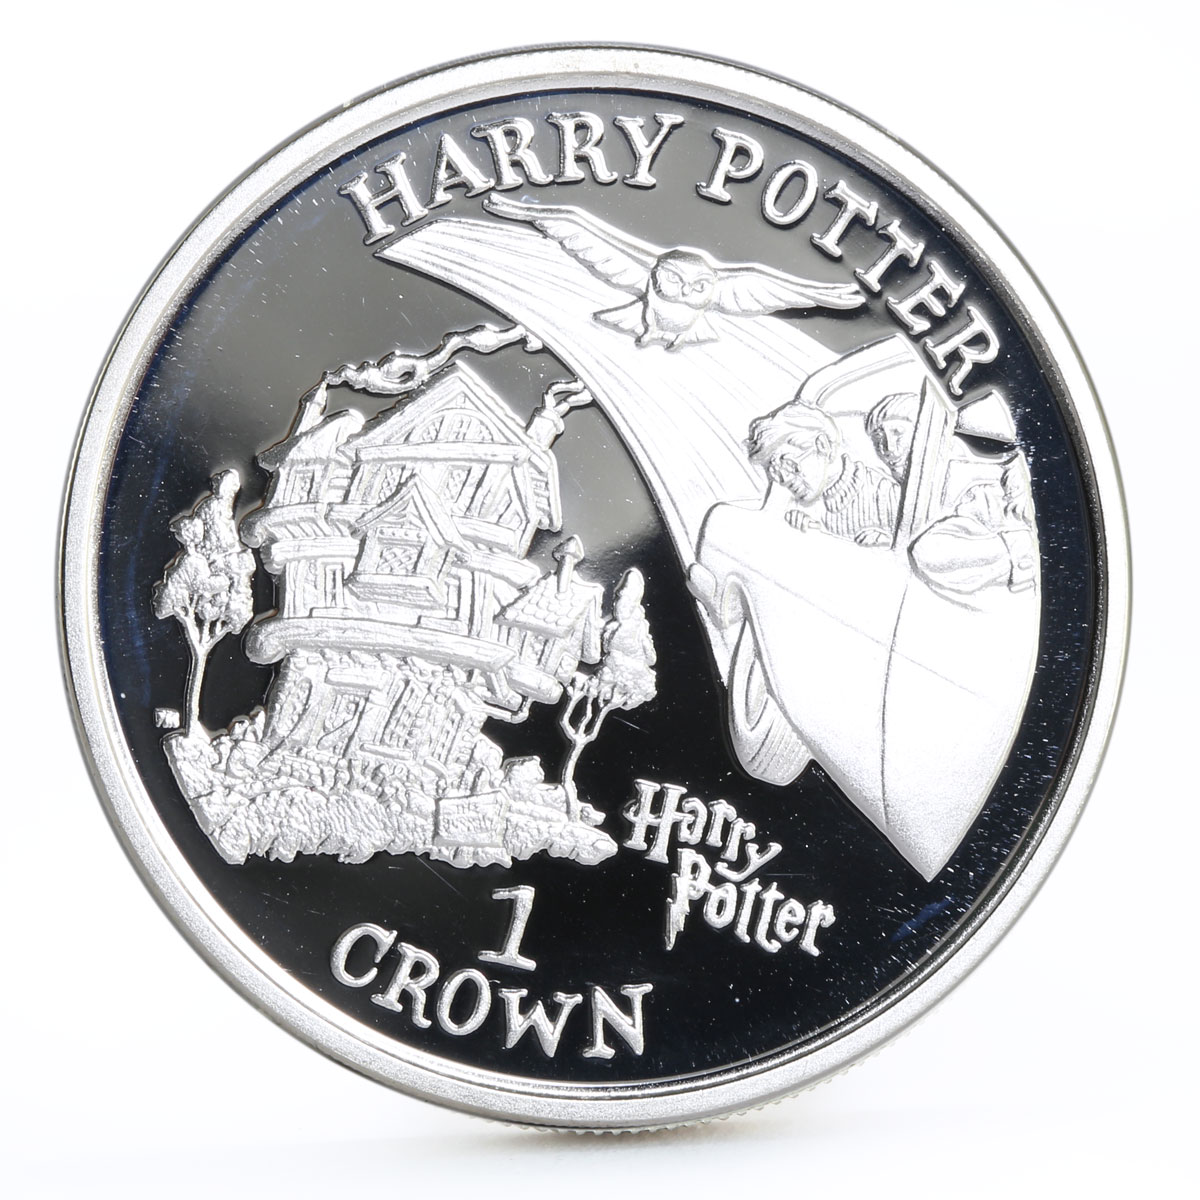 Isle of Man 1 crown Famous Characters series Harry Potter silver coin 2002